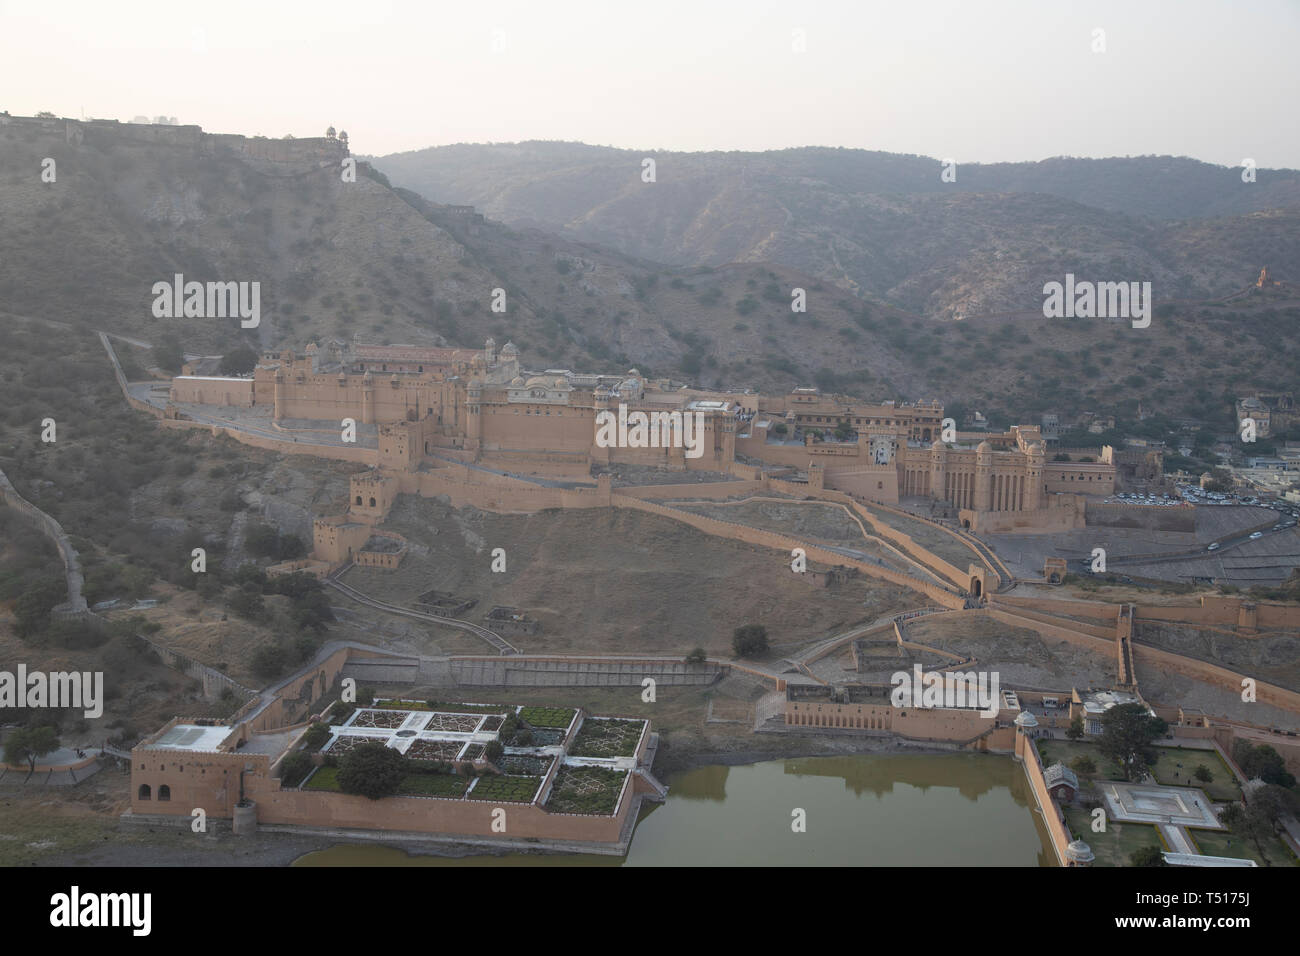 India, Rajasthan, Jaipur, Amber, Amber Fort and Wall Fortifications Stock Photo